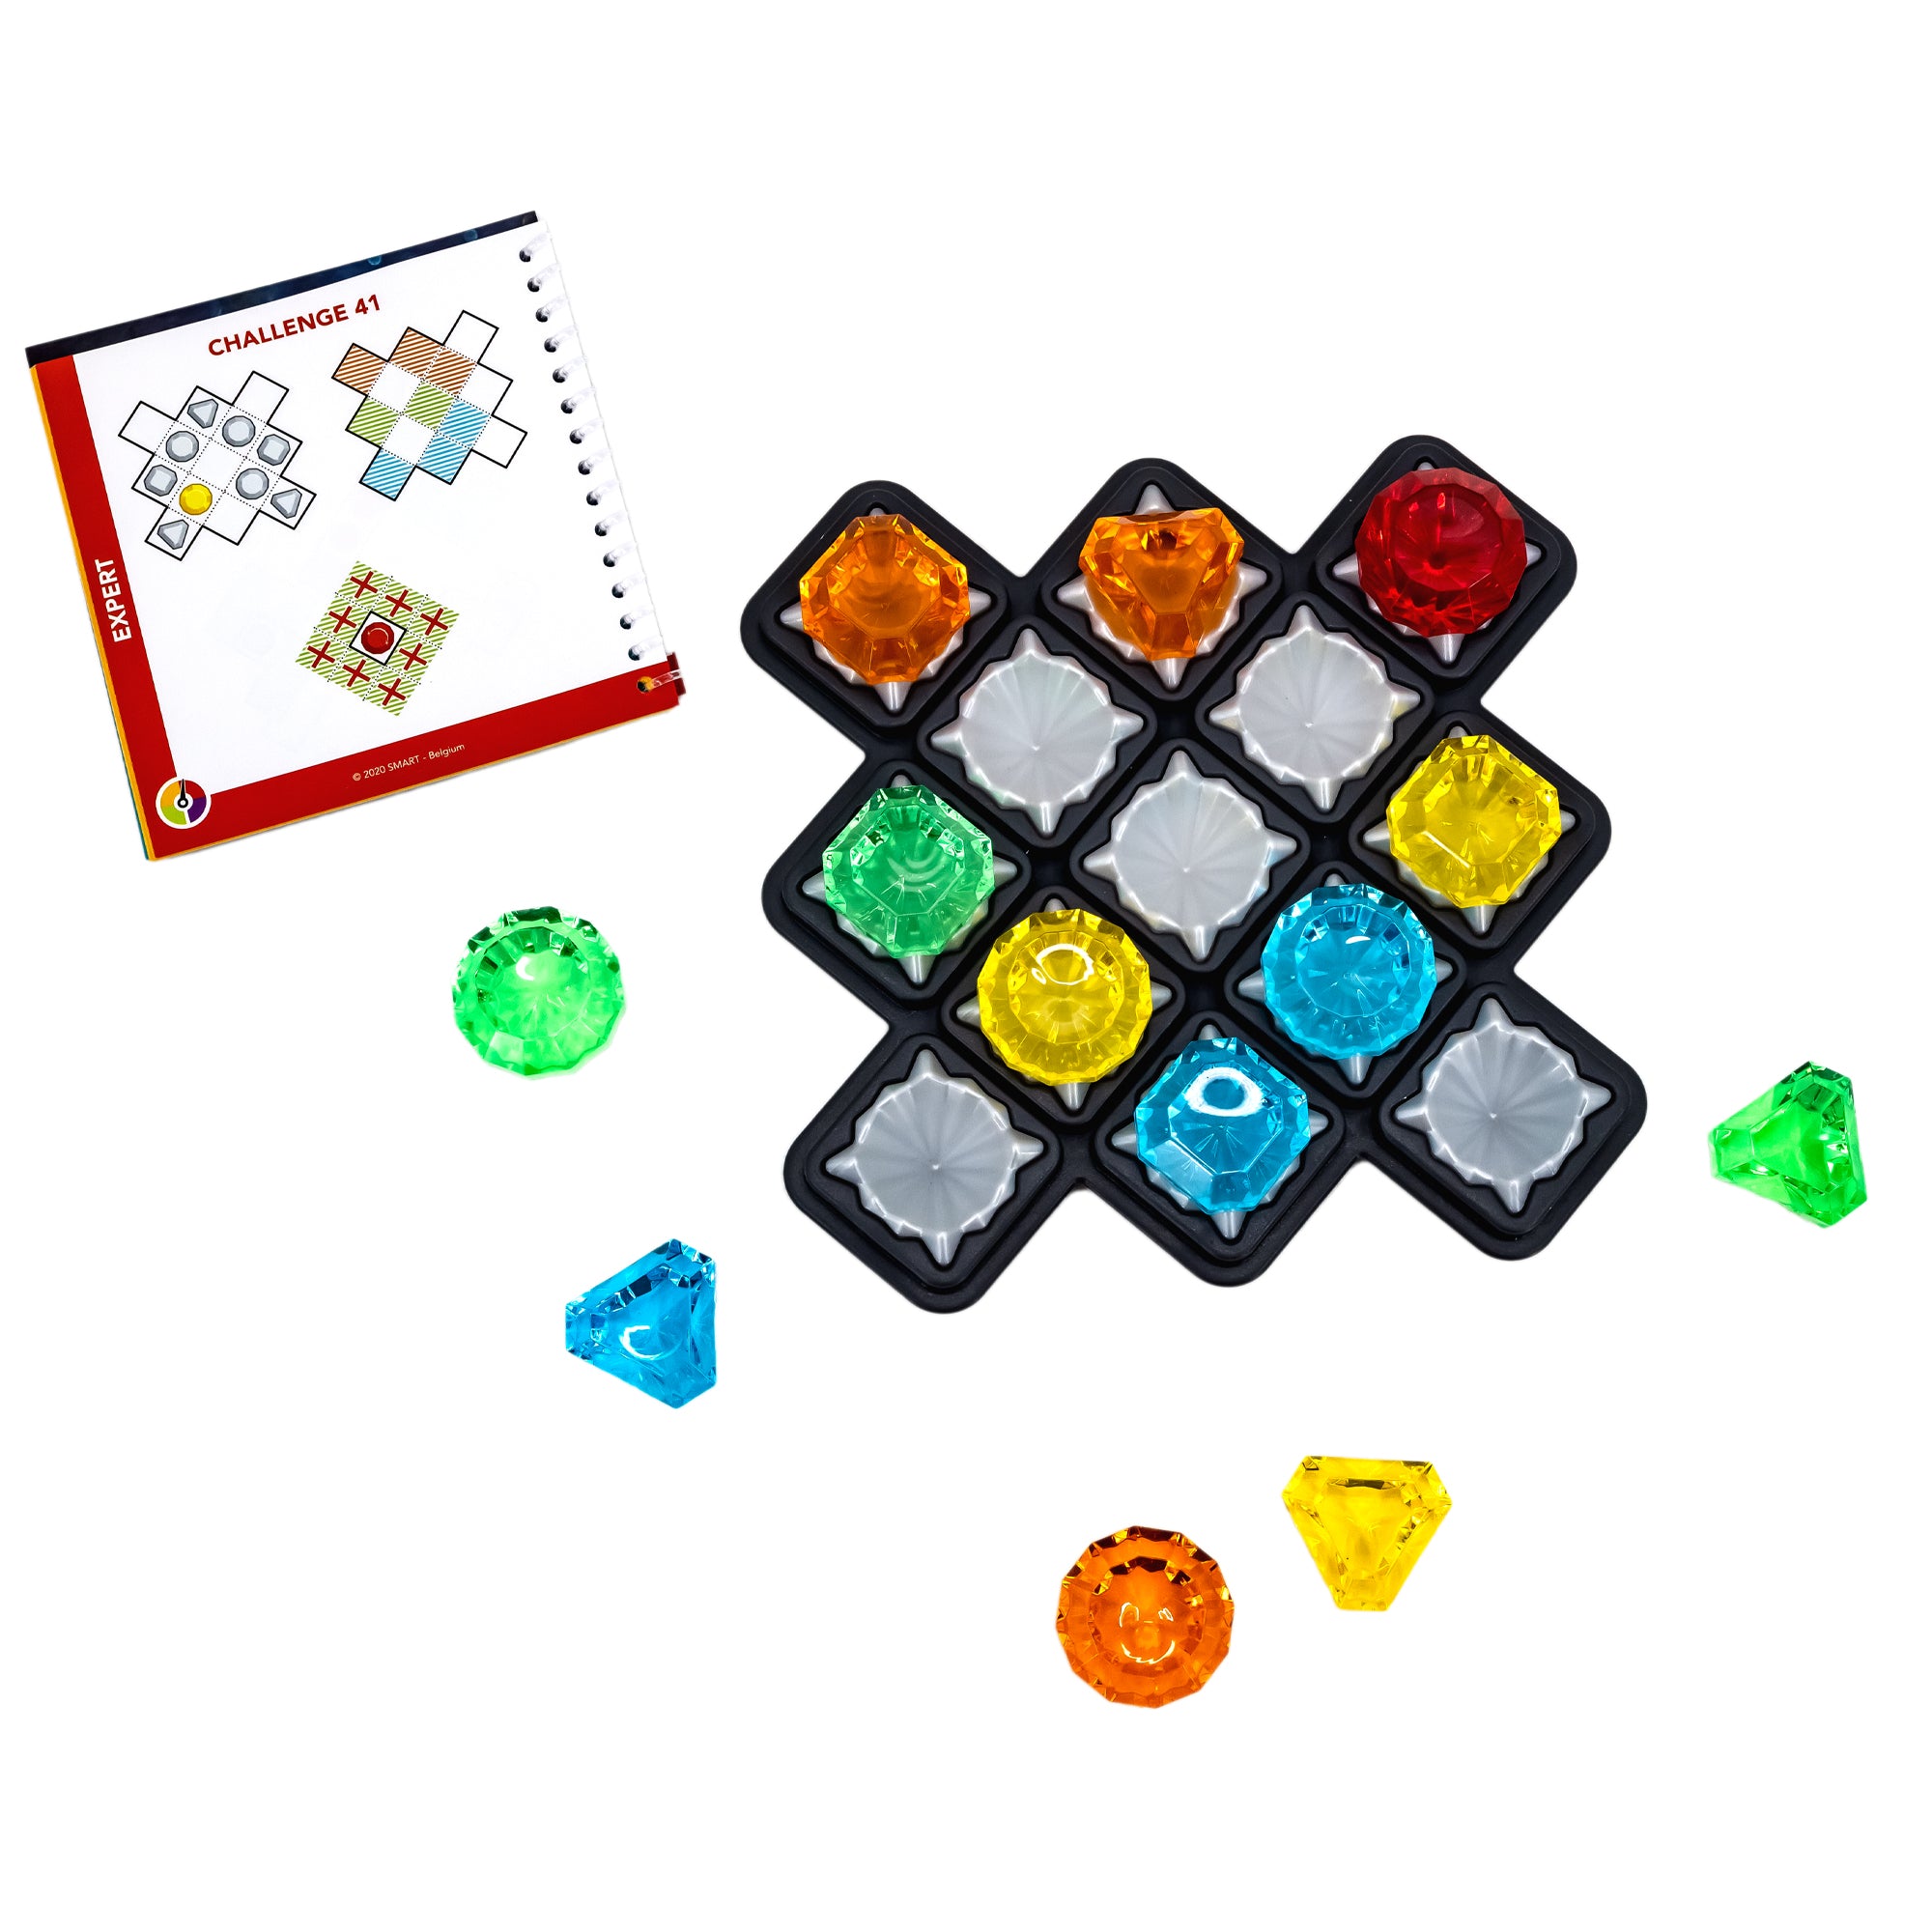 The Diamond Quest Smart Game laid out to show the contents. There is a spiral-bound booklet in the upper-left corner. The game board is to the right has many colored gem pieces in place on the board and several pieces off and surrounding the board. The gem pieces are red, orange, yellow, green, and blue.